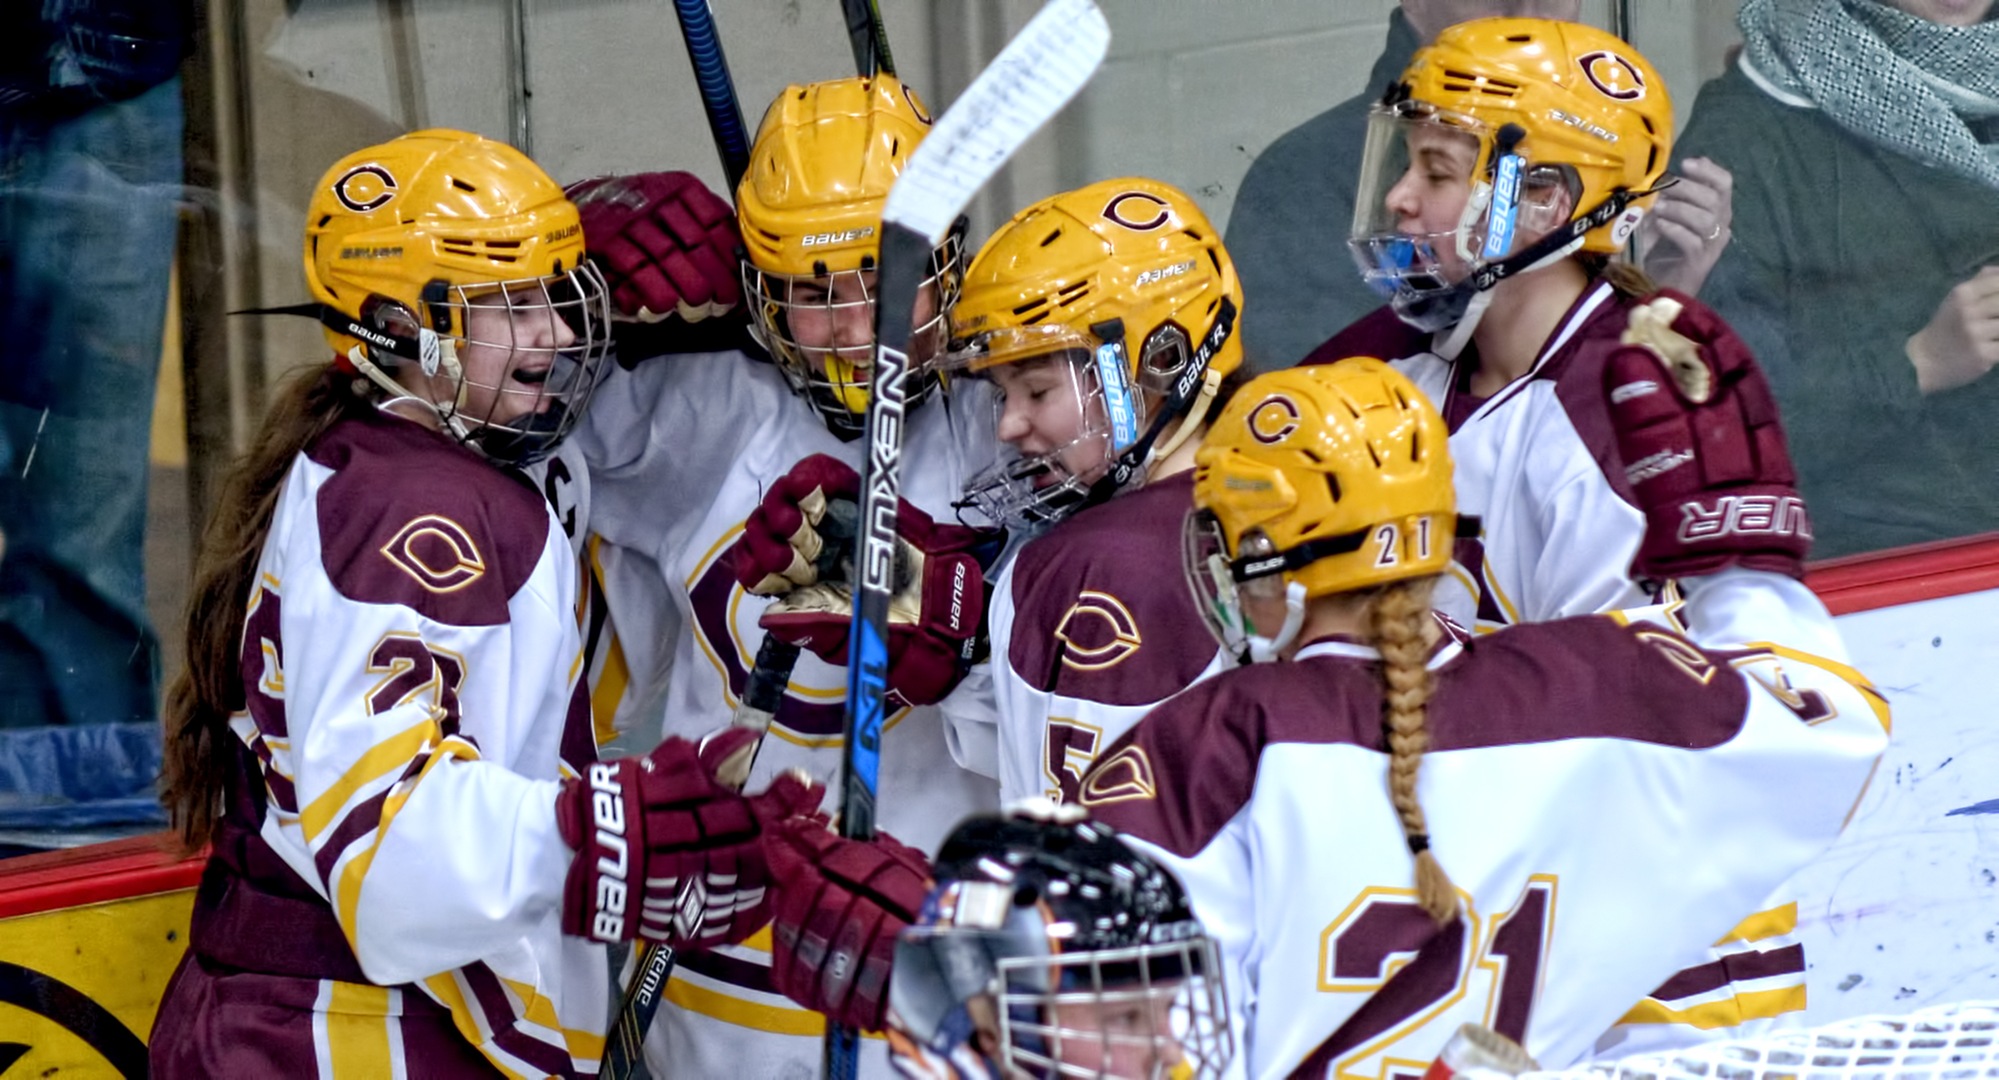 Cobber players congratulate Amanda Flemming on her third goal of the game in Concordia's 5-2 victory over Northland.